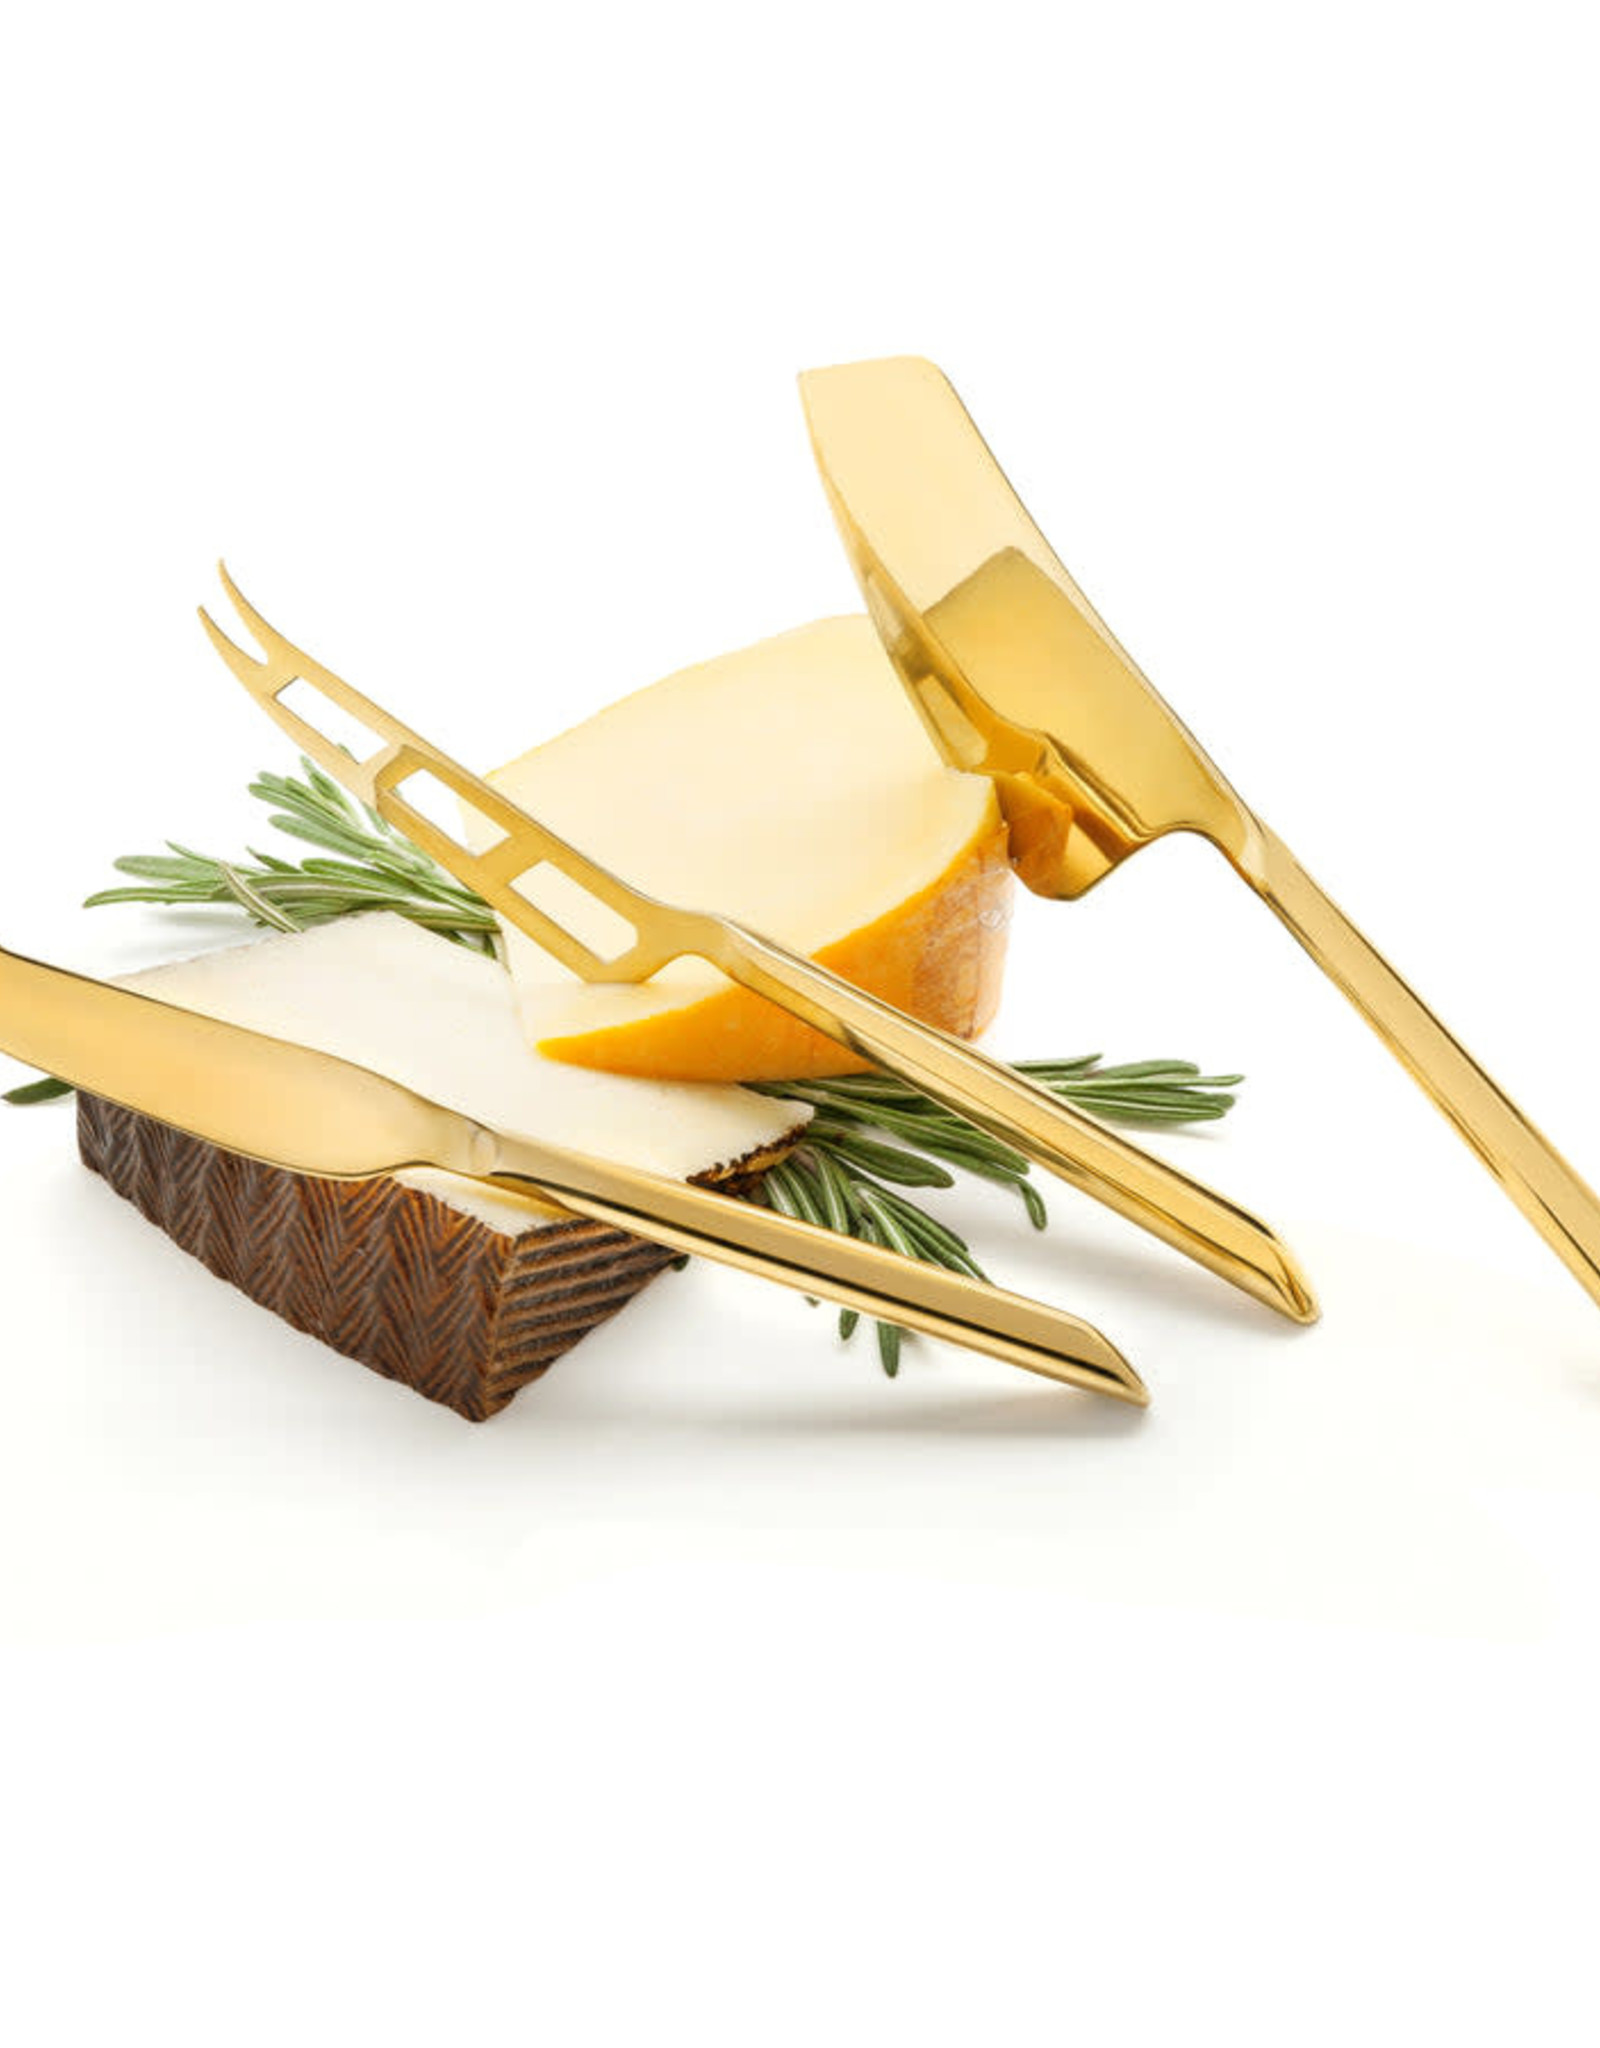 Gold Cheese Knives, S/3